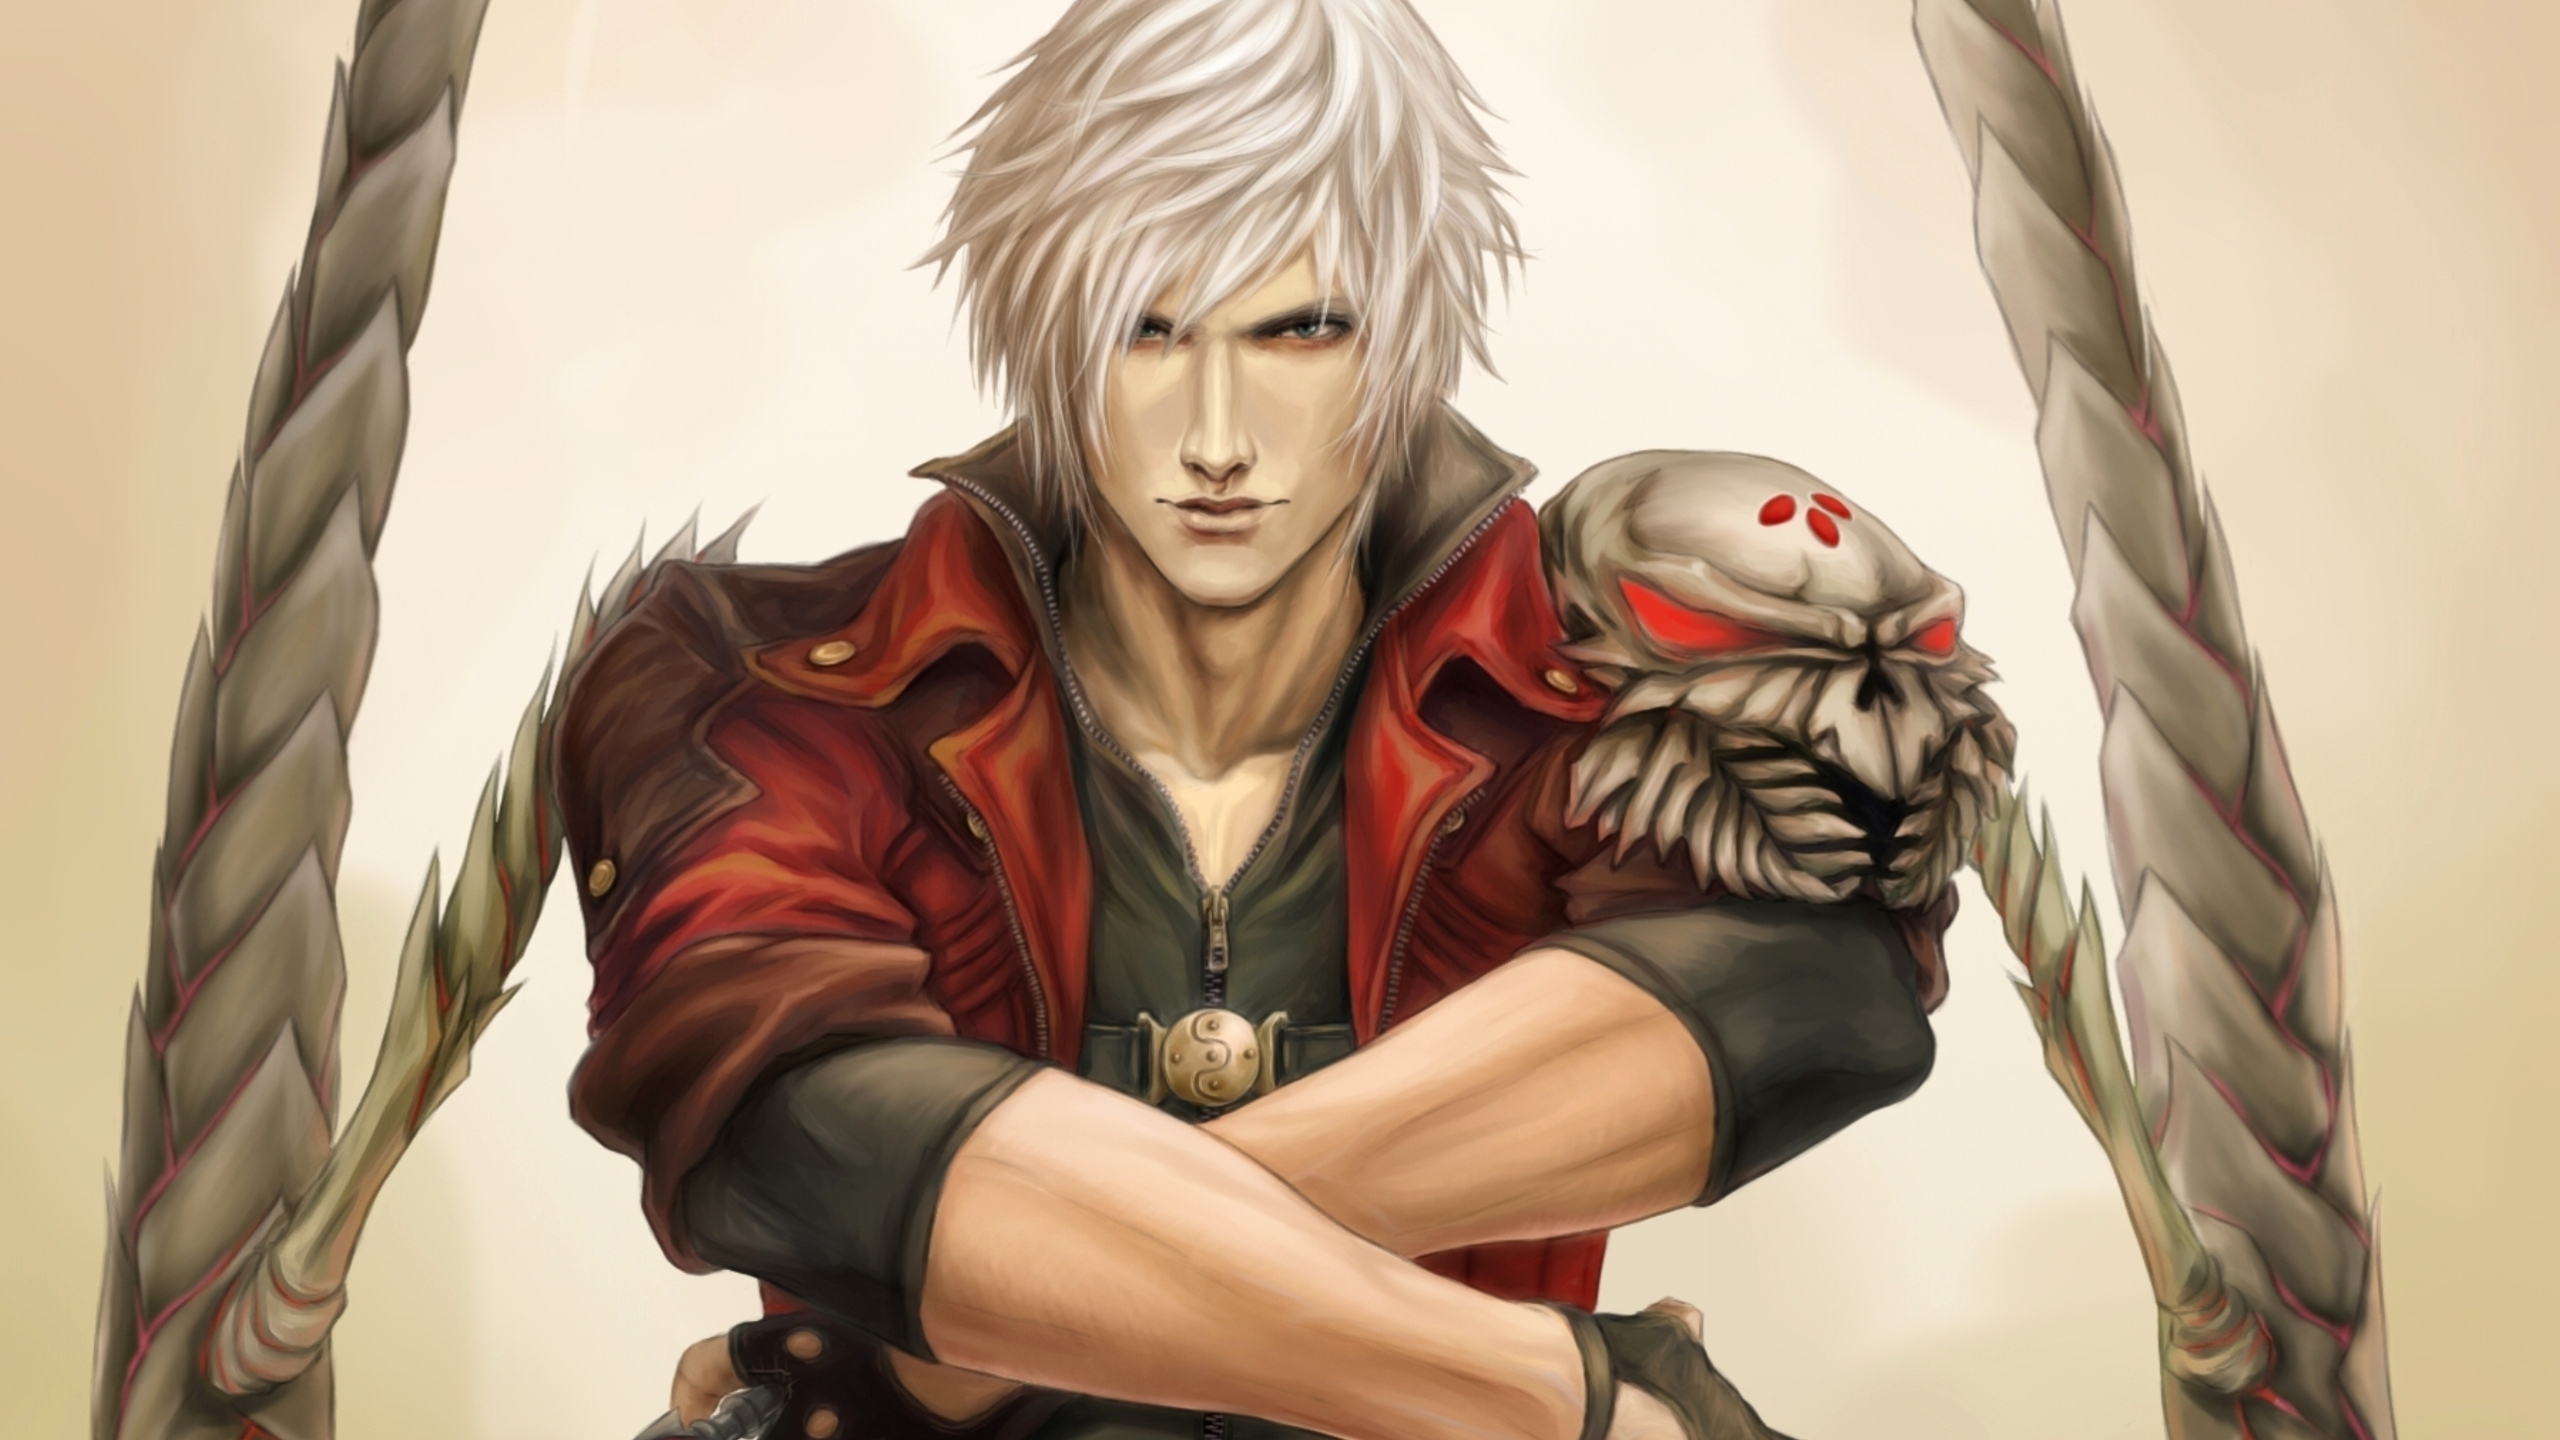 Devil May Cry 4 for 2560x1440 HDTV resolution